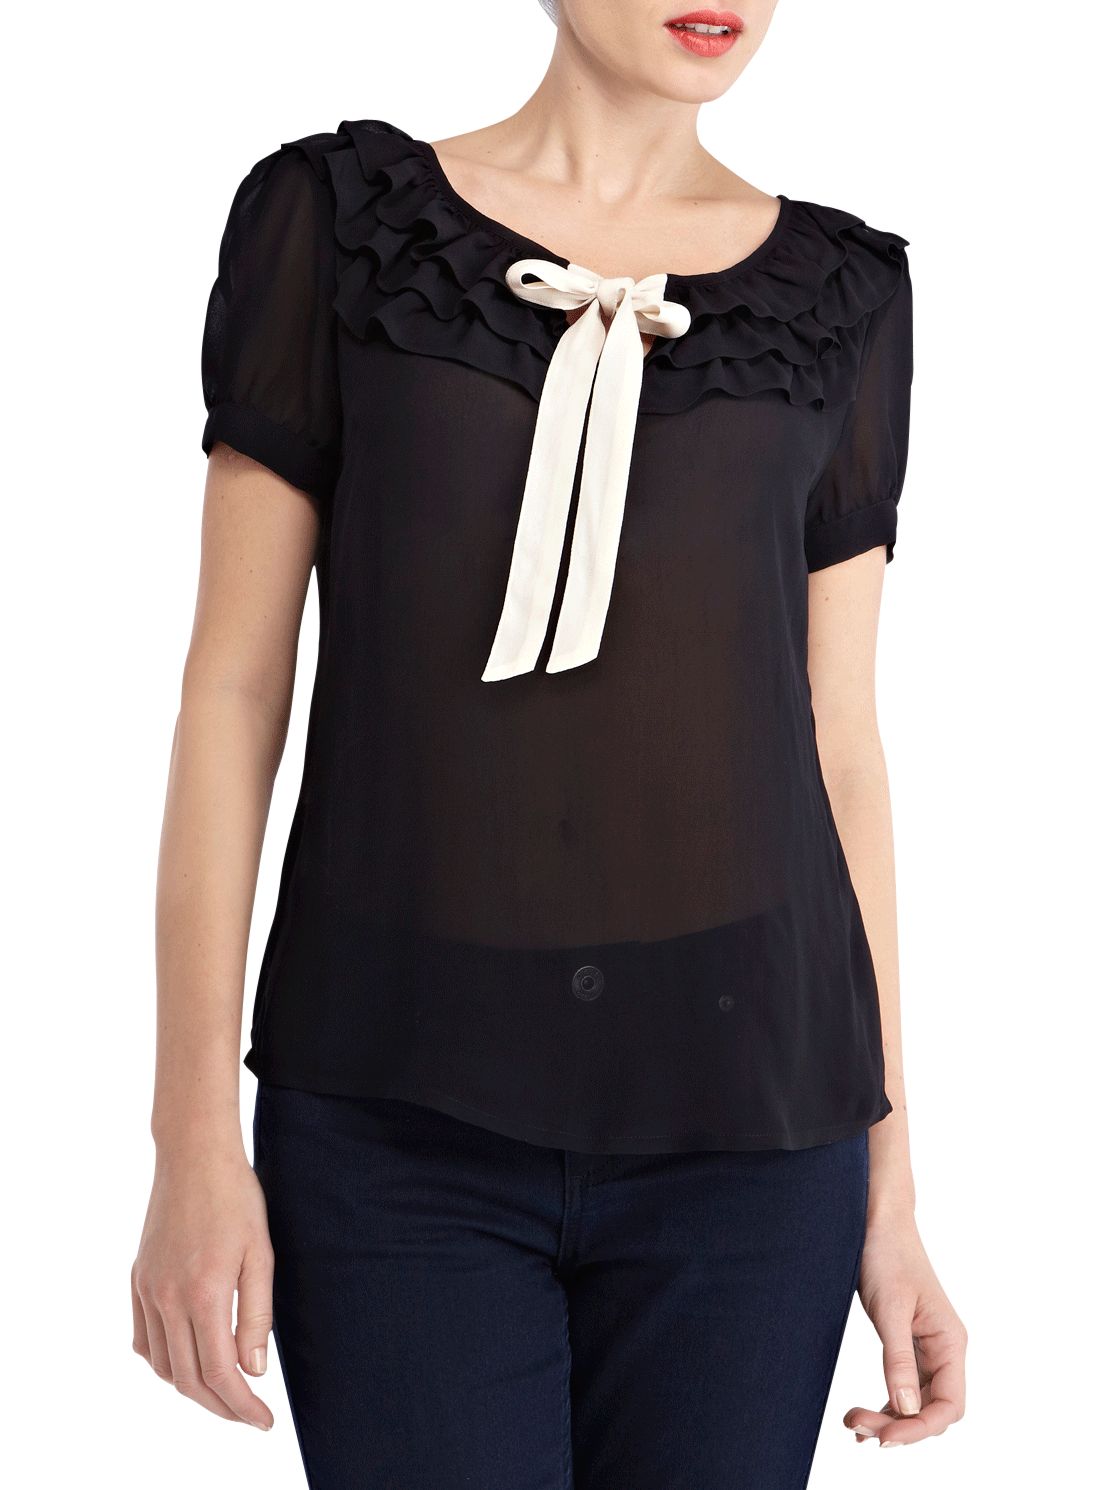 Dandy Frill Pussy Bow Blouse, Black